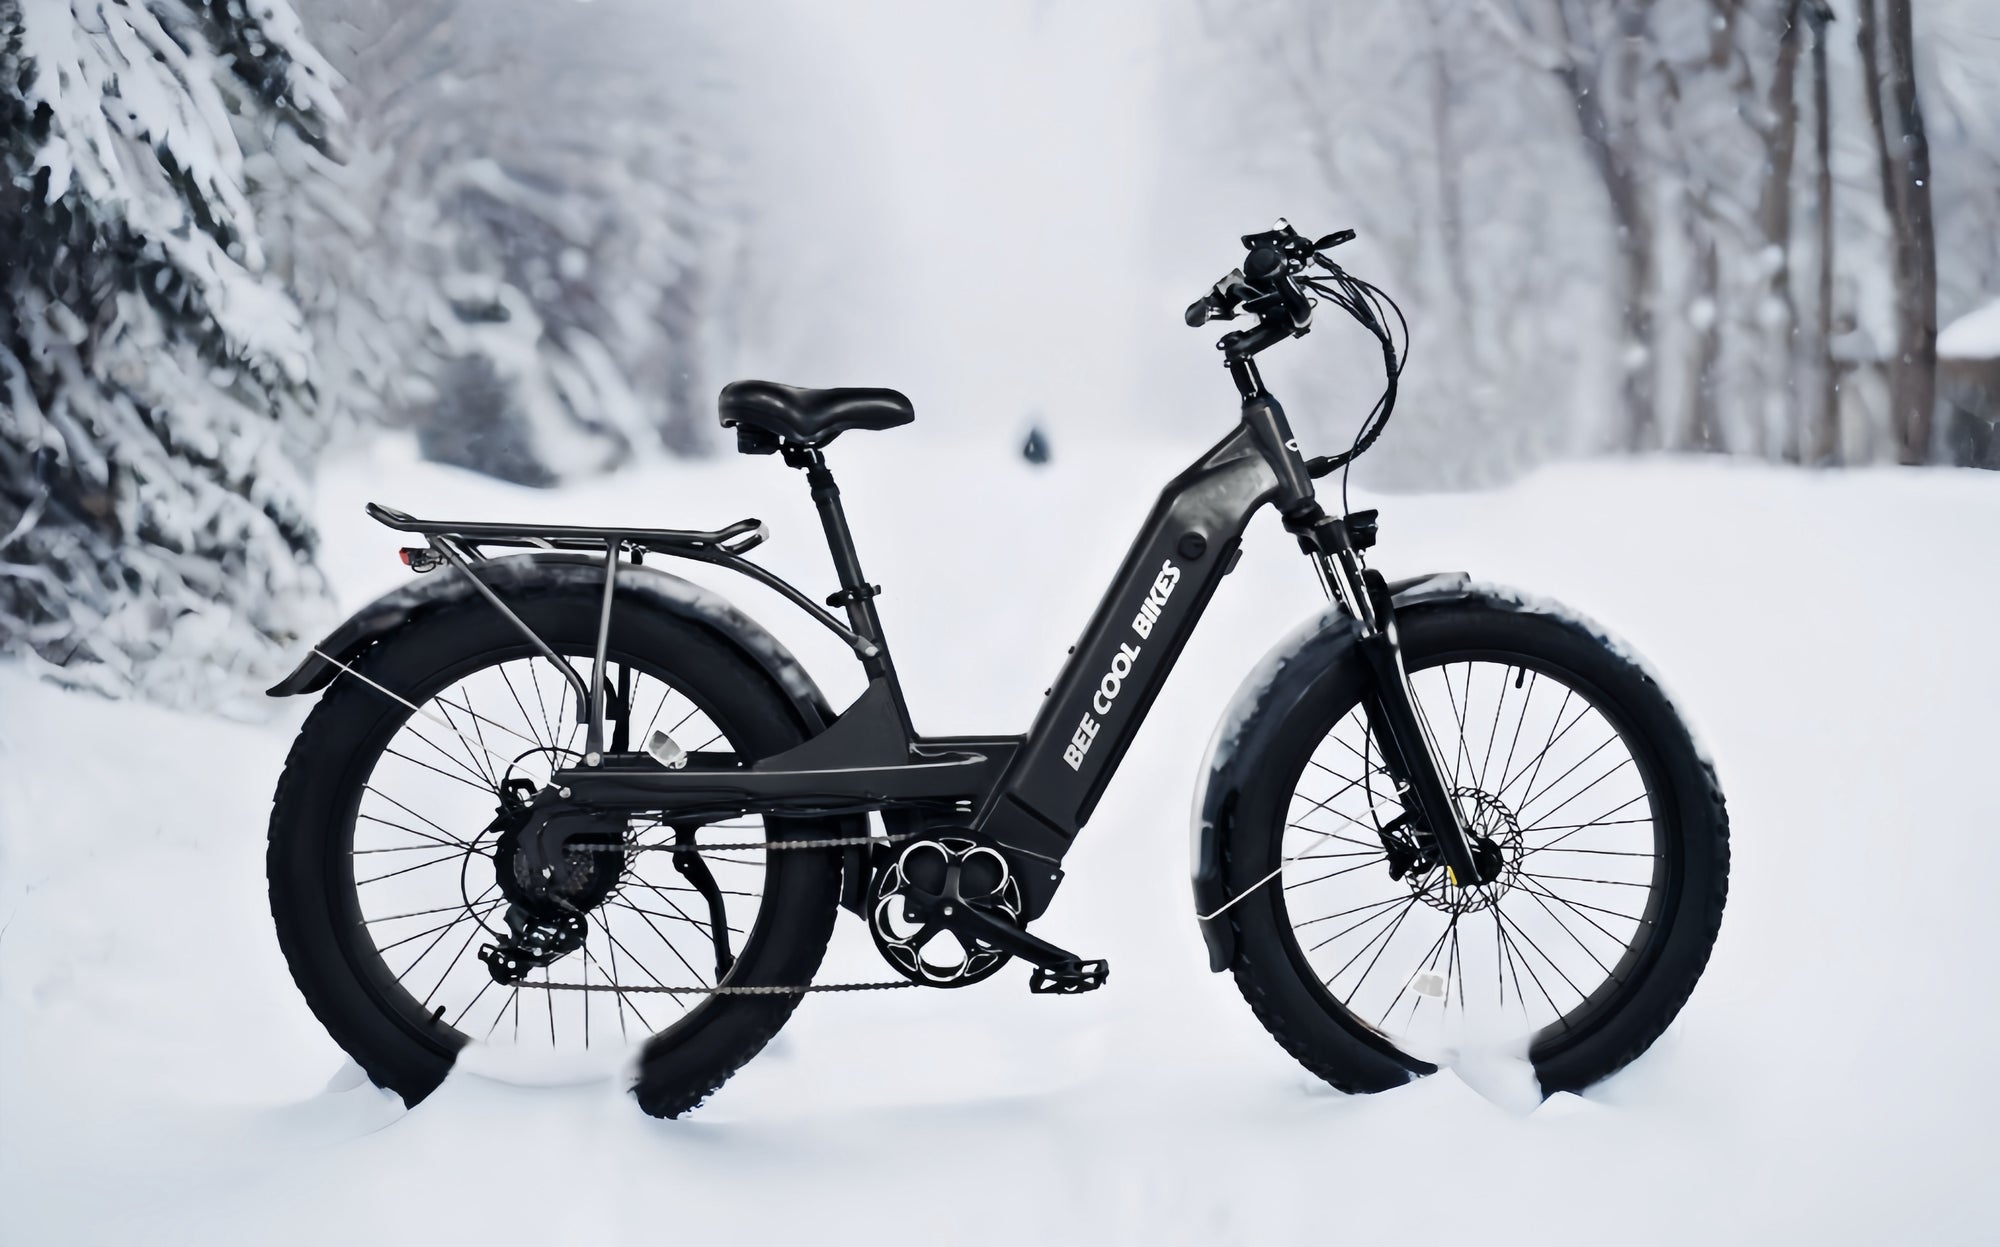 Safety Precautions for Riding an eBike in Snowstorm Conditions